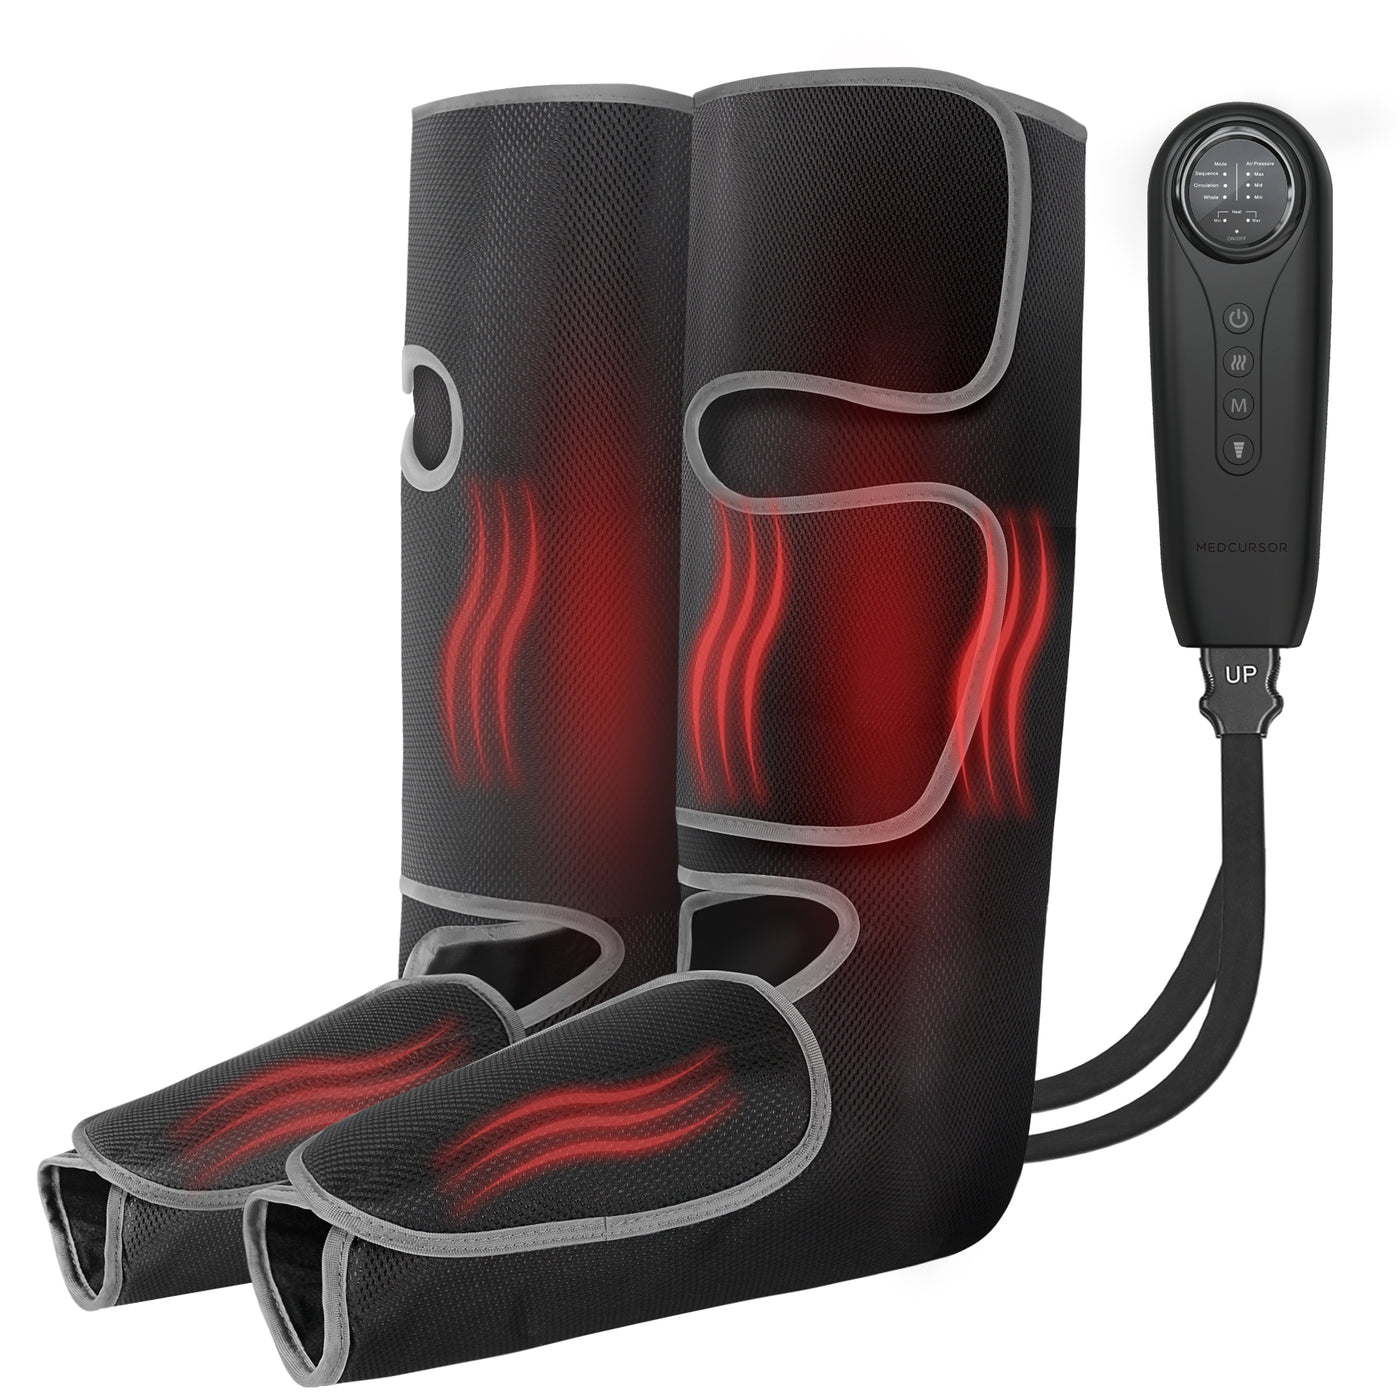 Foot DR Air-O-Thermo Full Air Compression Leg Massager w/ Heat